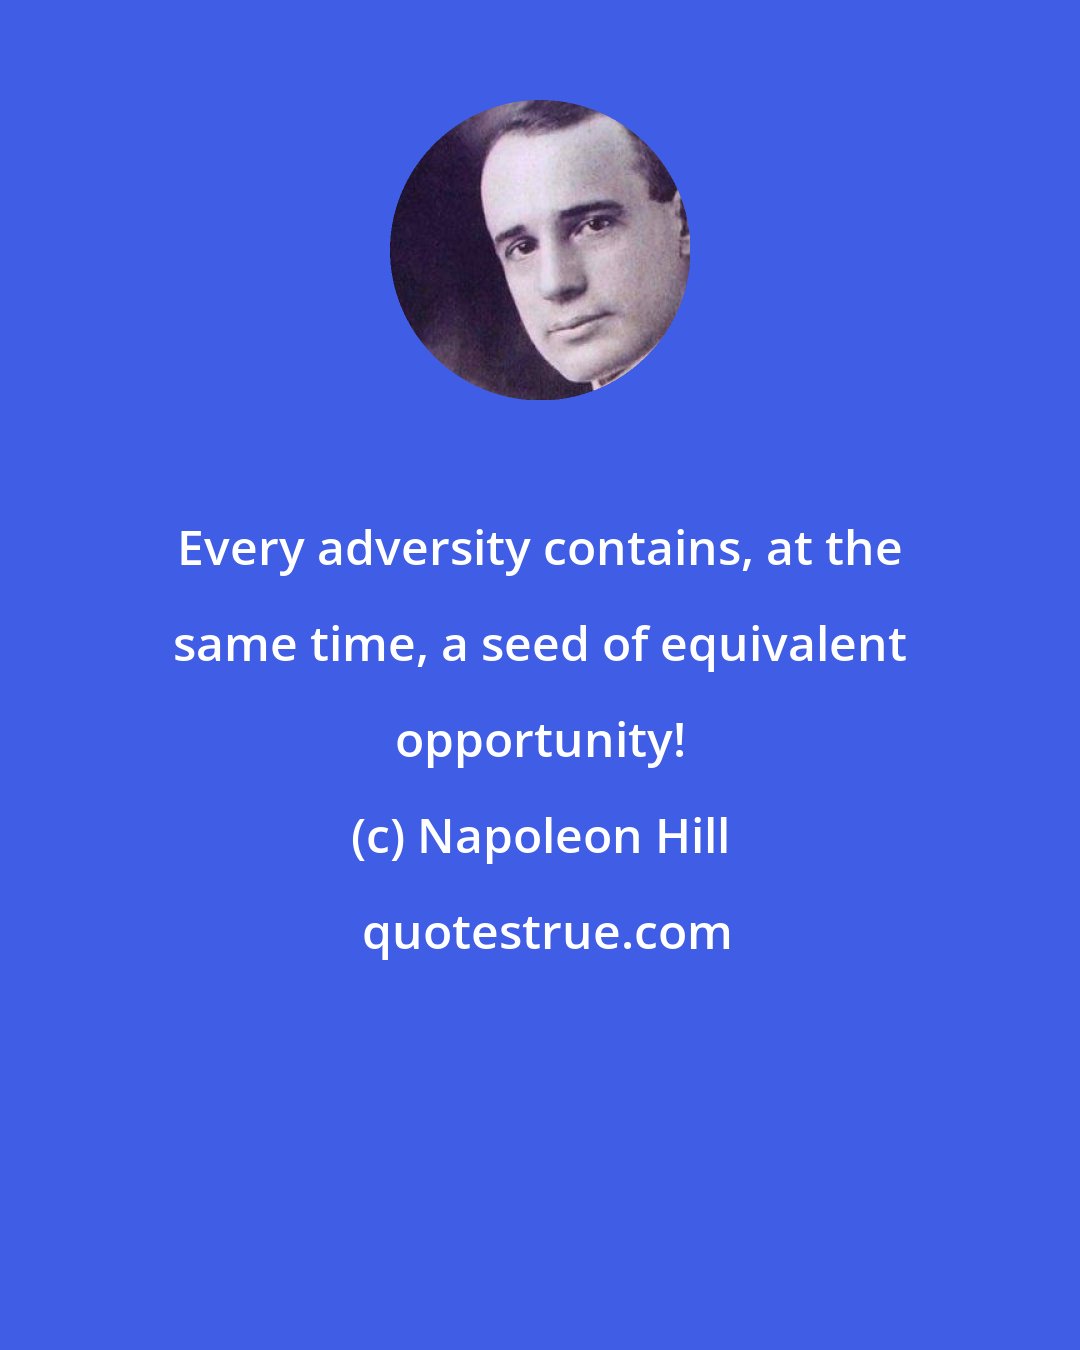 Napoleon Hill: Every adversity contains, at the same time, a seed of equivalent opportunity!